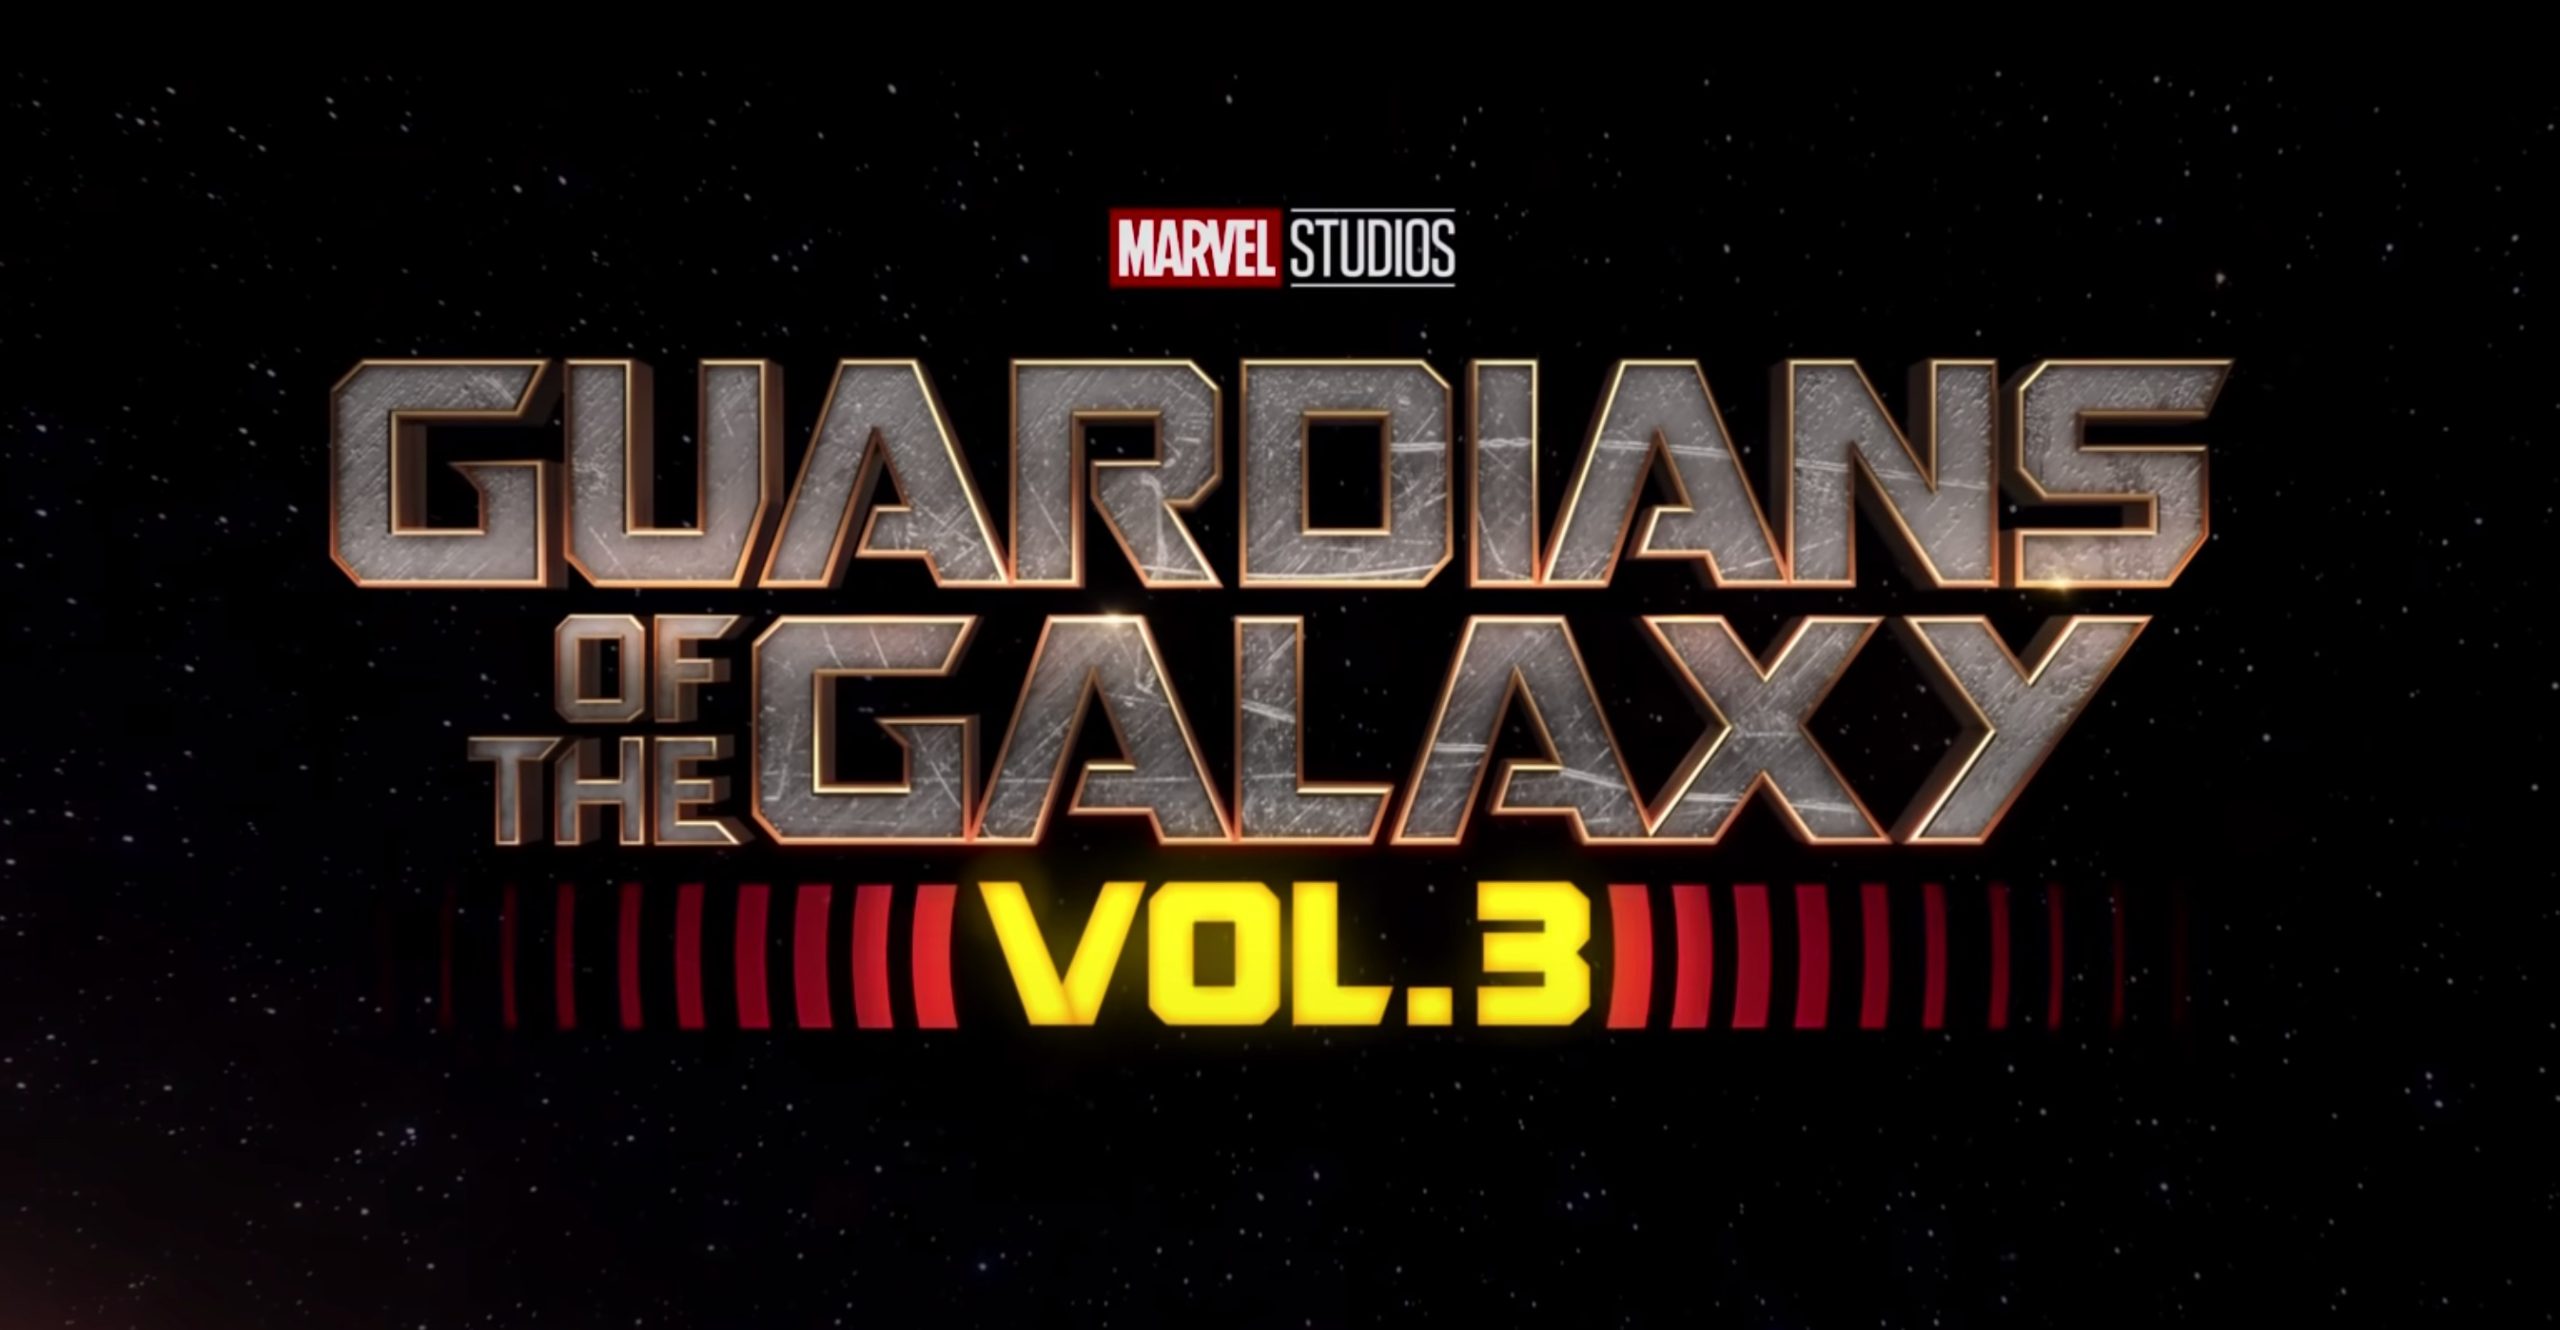 The poster for James Gunn's magnum opus, Guardians of the Galaxy Vol. 3 (2023).